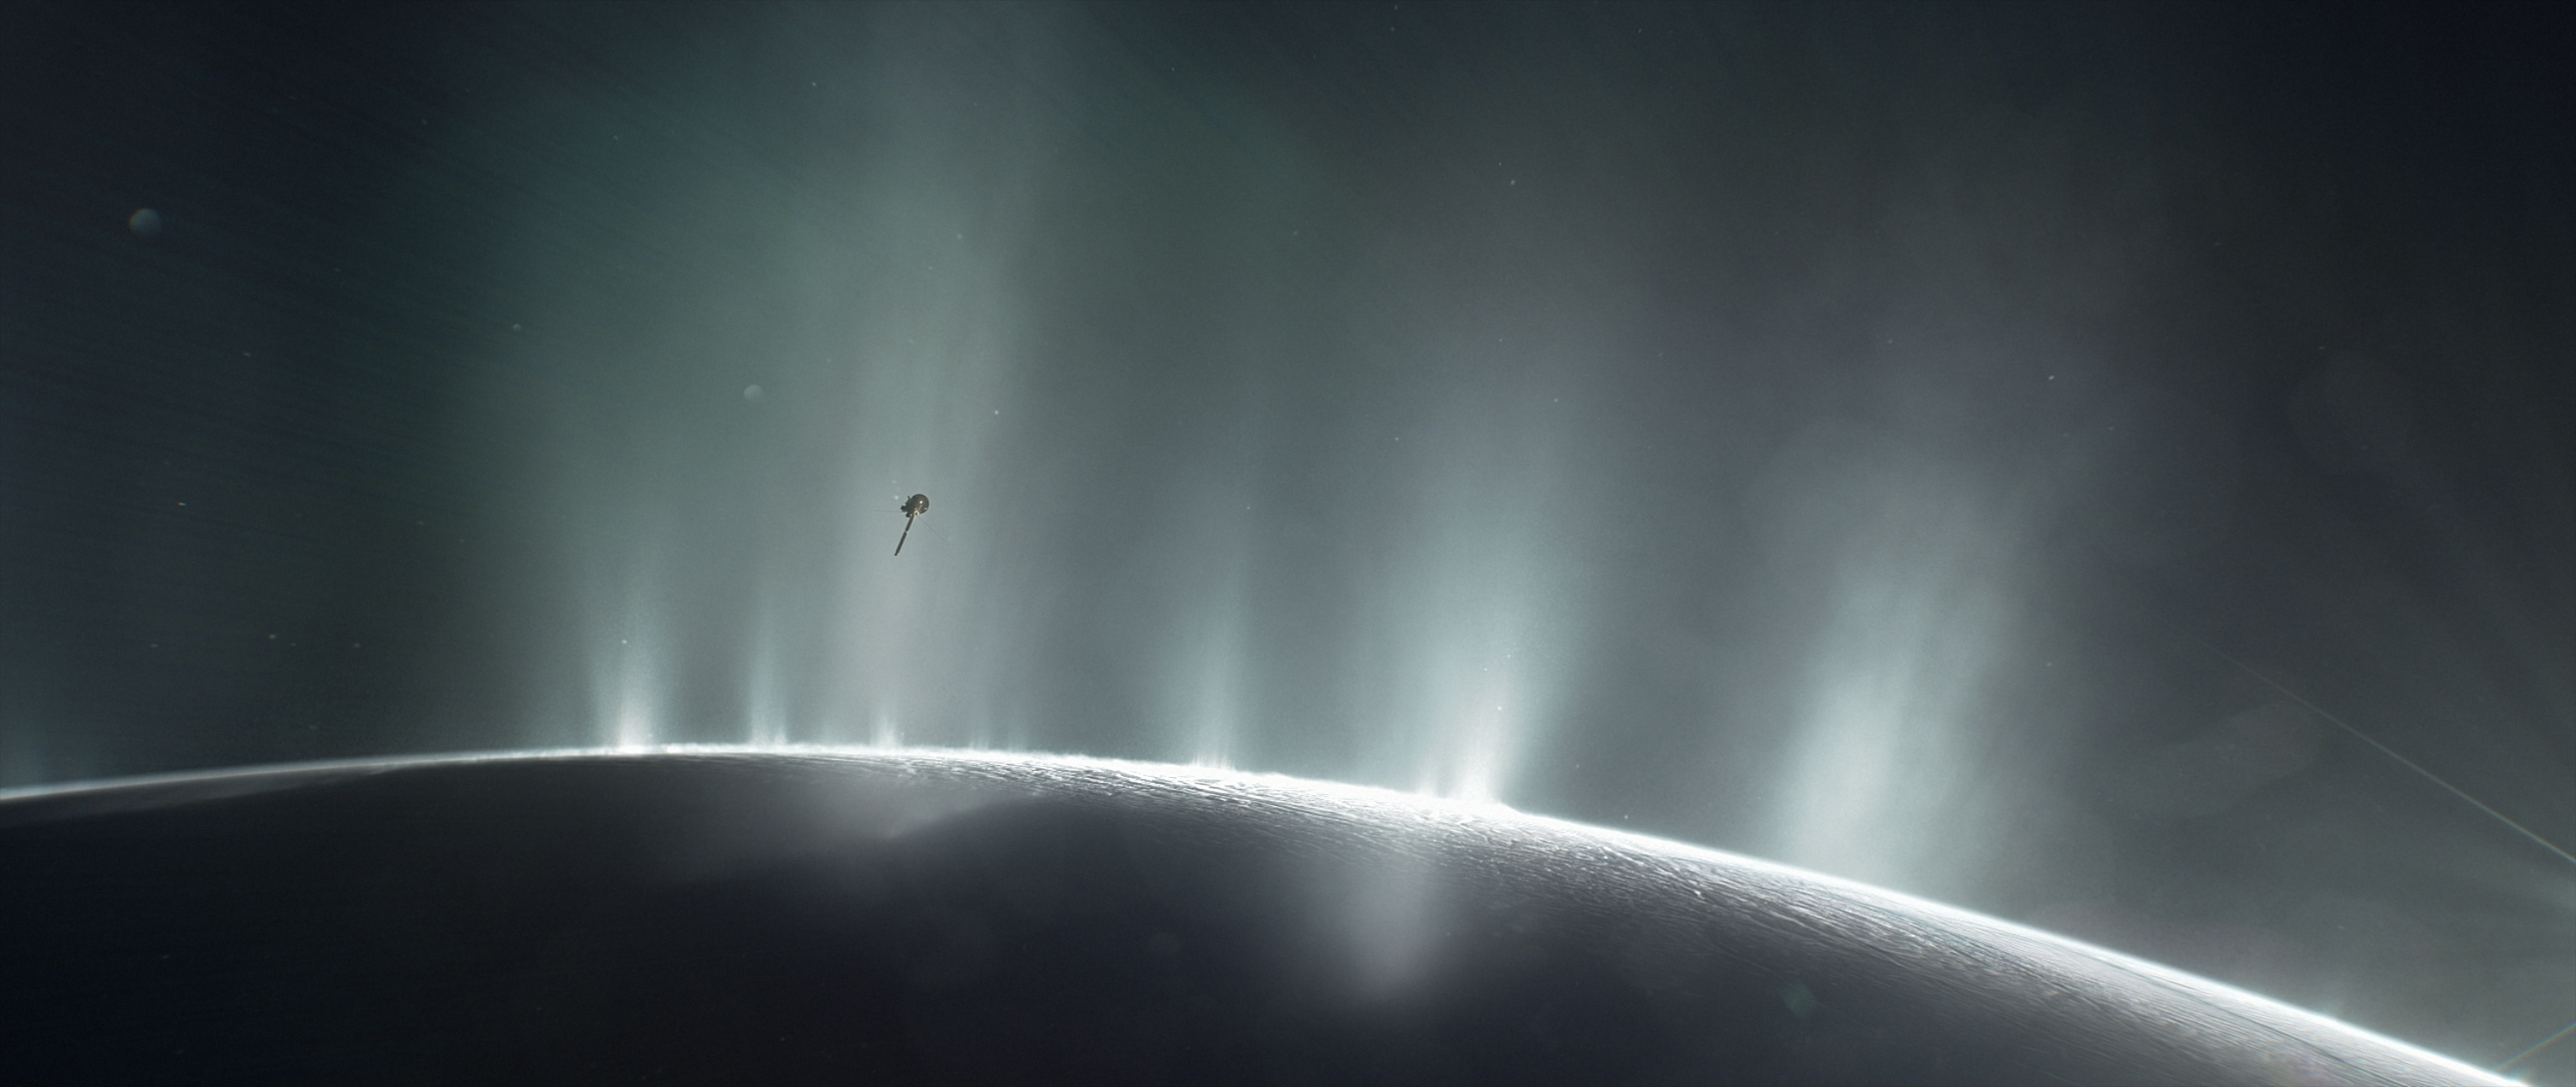 An illustration shows the curving horizon of an icy moon's surface, from which several jets of ice particles and water vapor spray, catching the Sun's light. A robotic spacecraft, Cassini, is visible as a small shape in the distance, headed for the icy plumes.